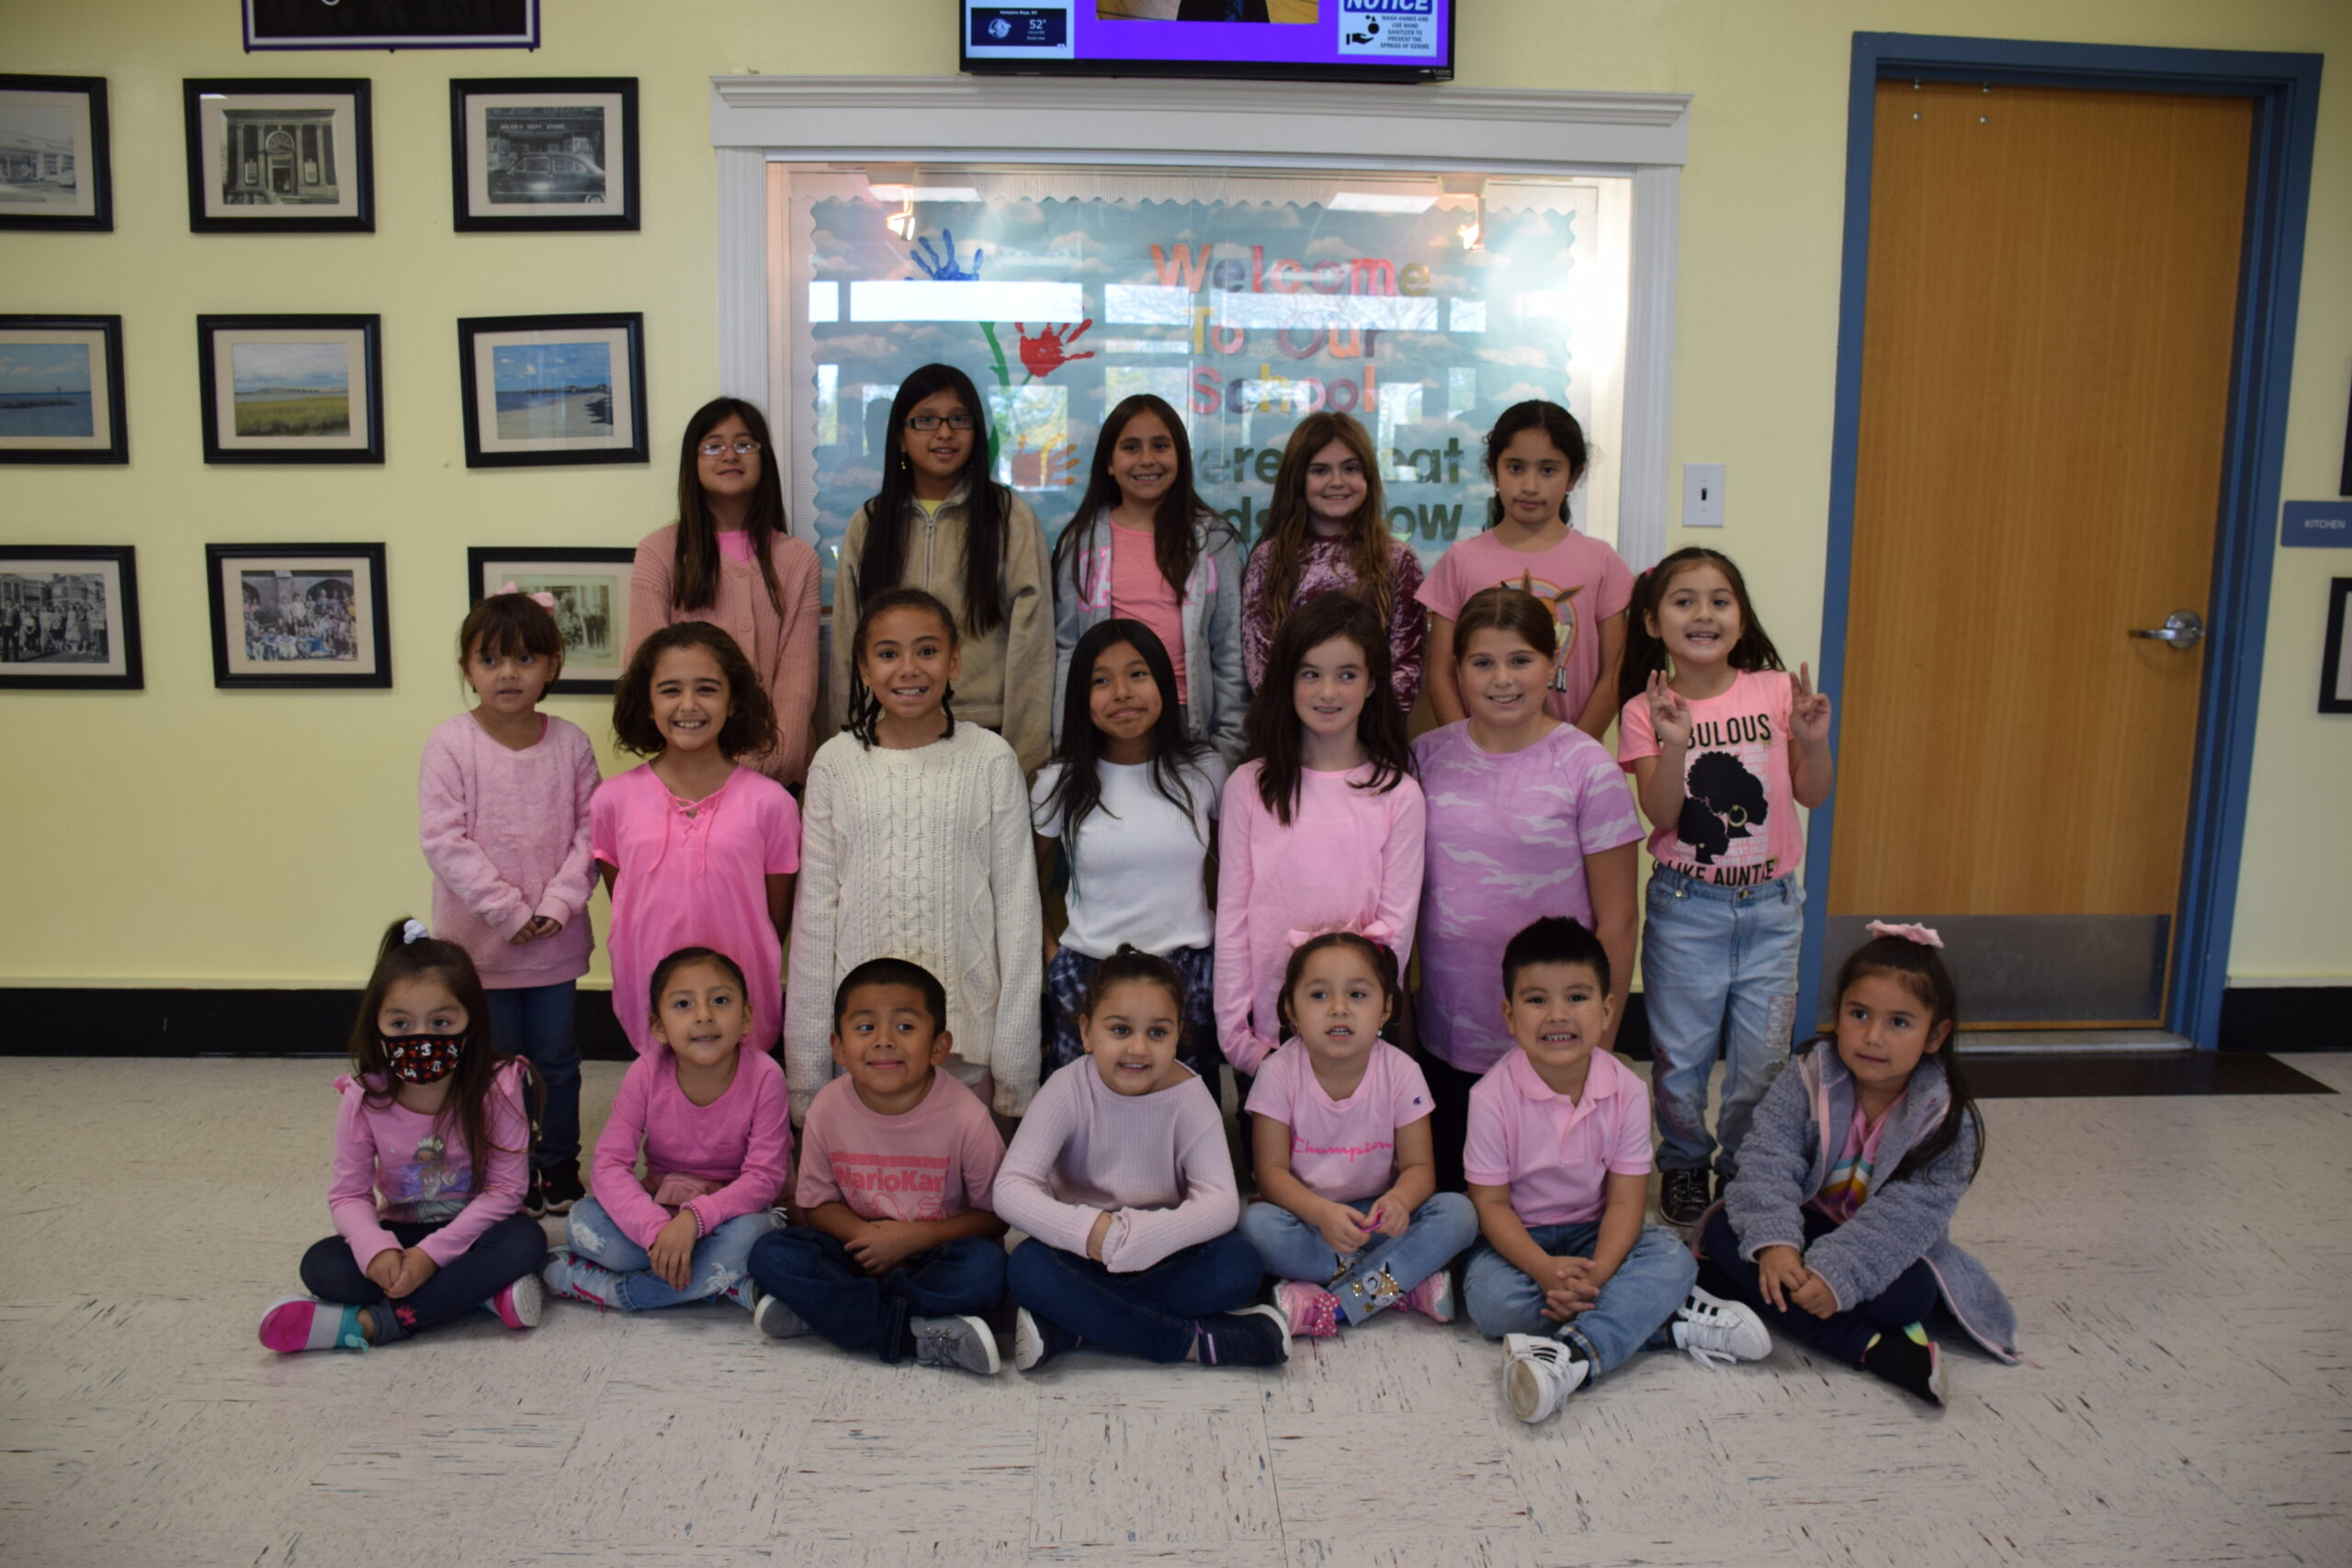 The members of the Hampton Bays Elementary School service organization K-Kids recently donated $250 to the American Cancer Society as part of their annual Breast Cancer Awareness fundraiser. They raised the funds by selling breast cancer awareness bracelets and pins to fellow students, teachers and administrators. Students and staff also wore the color pink on October 28 in honor of the cause. COURTESY HAMPTON BAYS SCHOOL DISTRICT